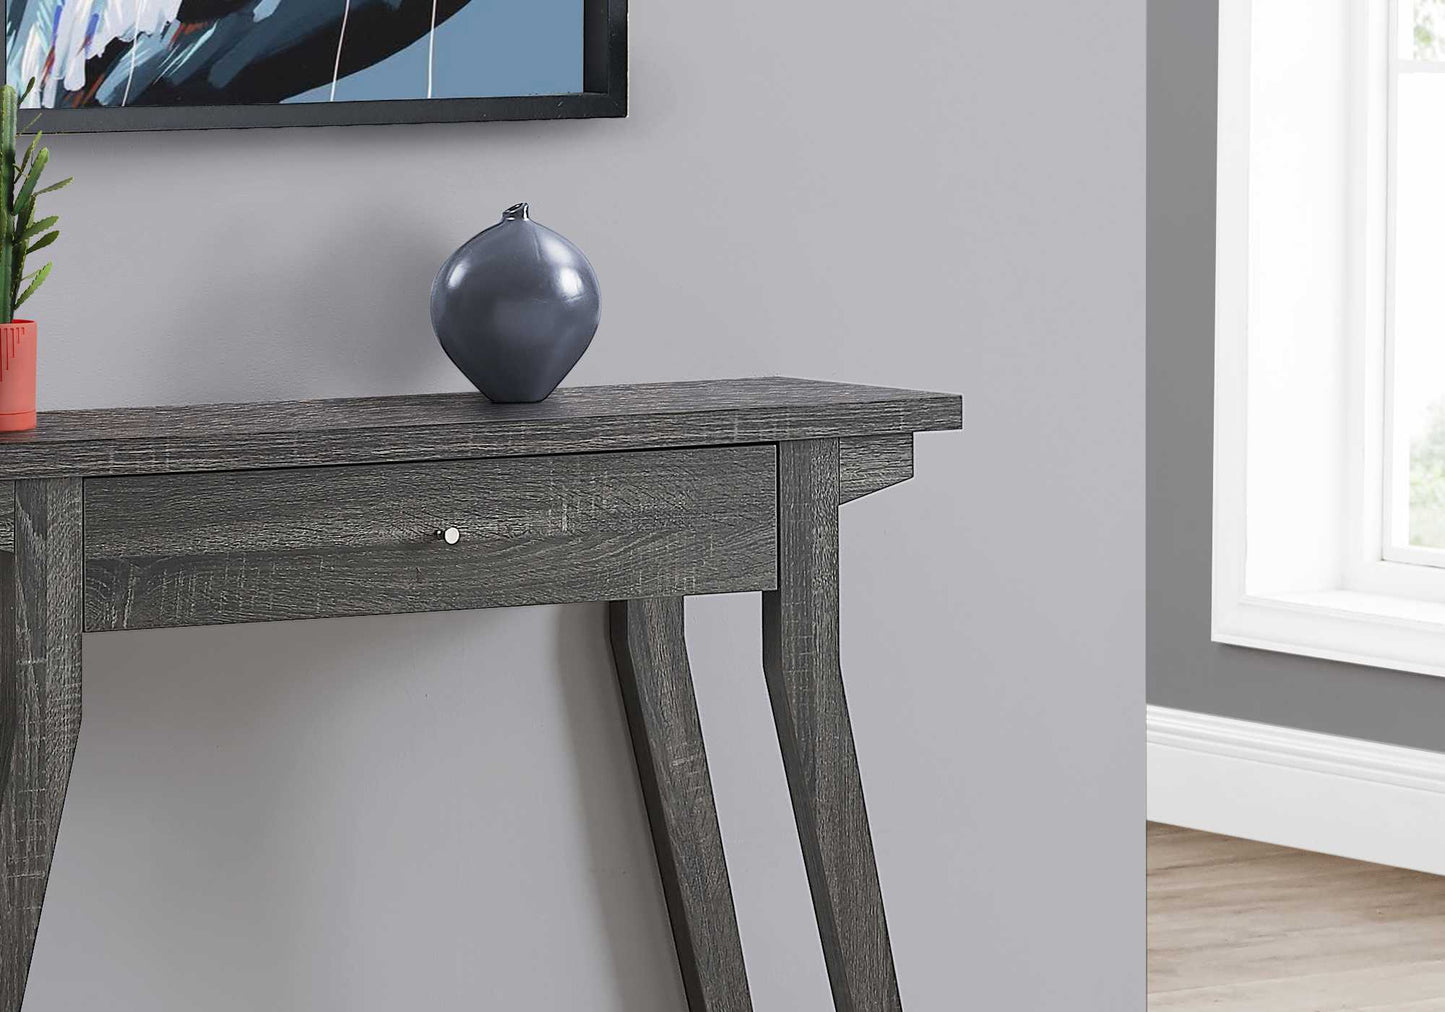 Rectangular Grey Accent Table with Storage Drawer